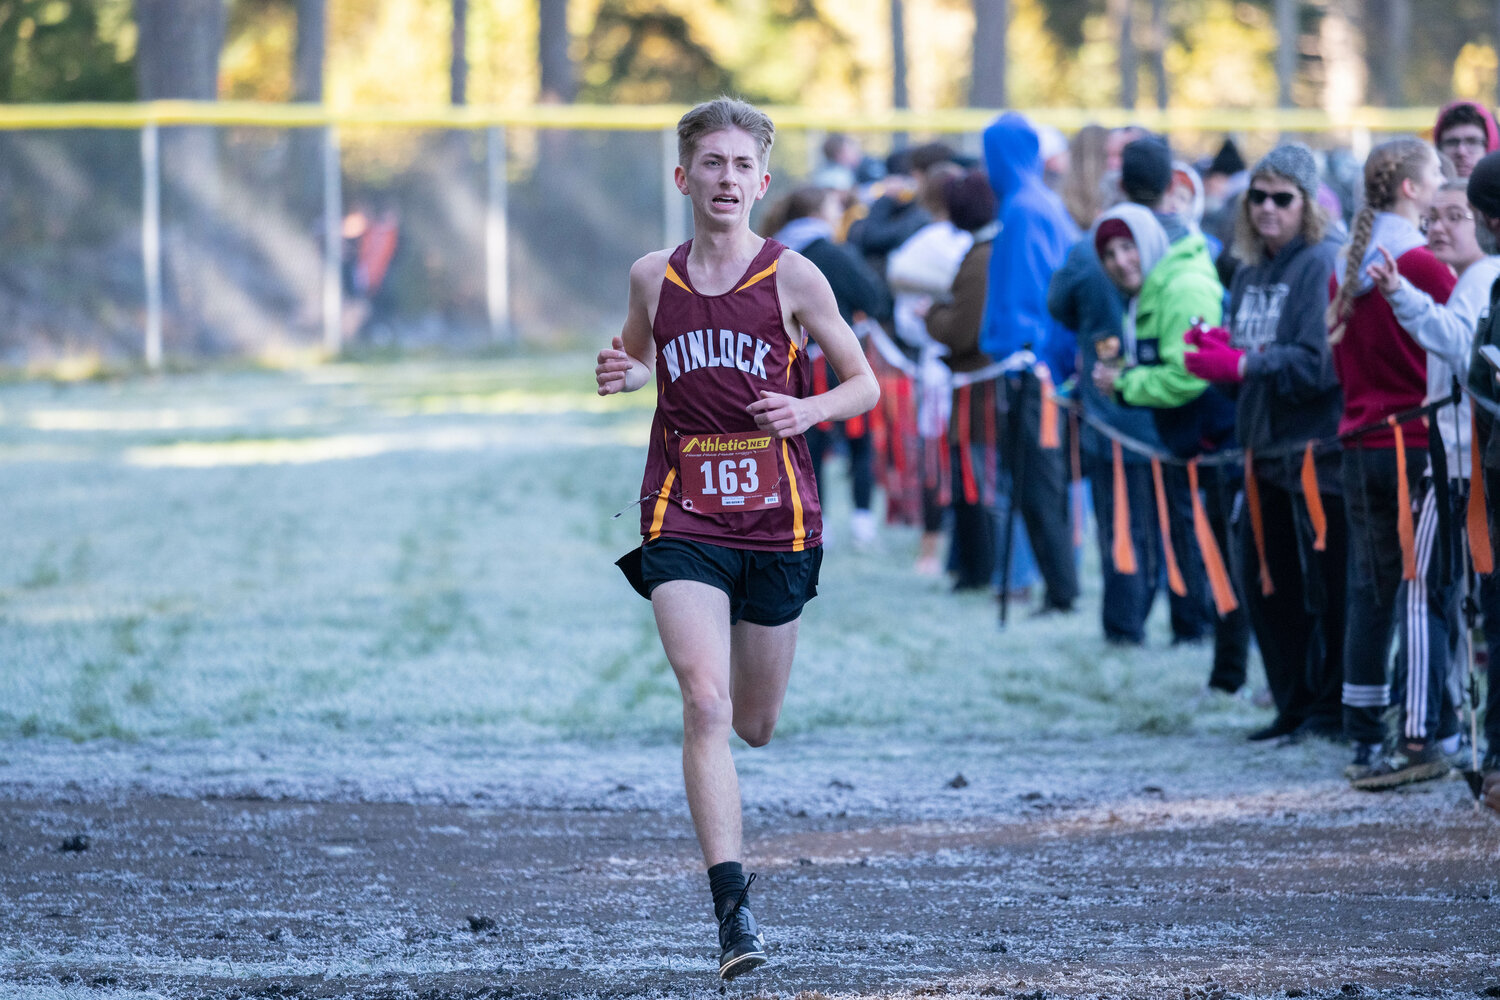 Winlock's Chase Trodahl comes toward the finish line to finish third in the boys' race at the 1B/2B District 4 cross country championship meet on Oct. 28 in Rainier.